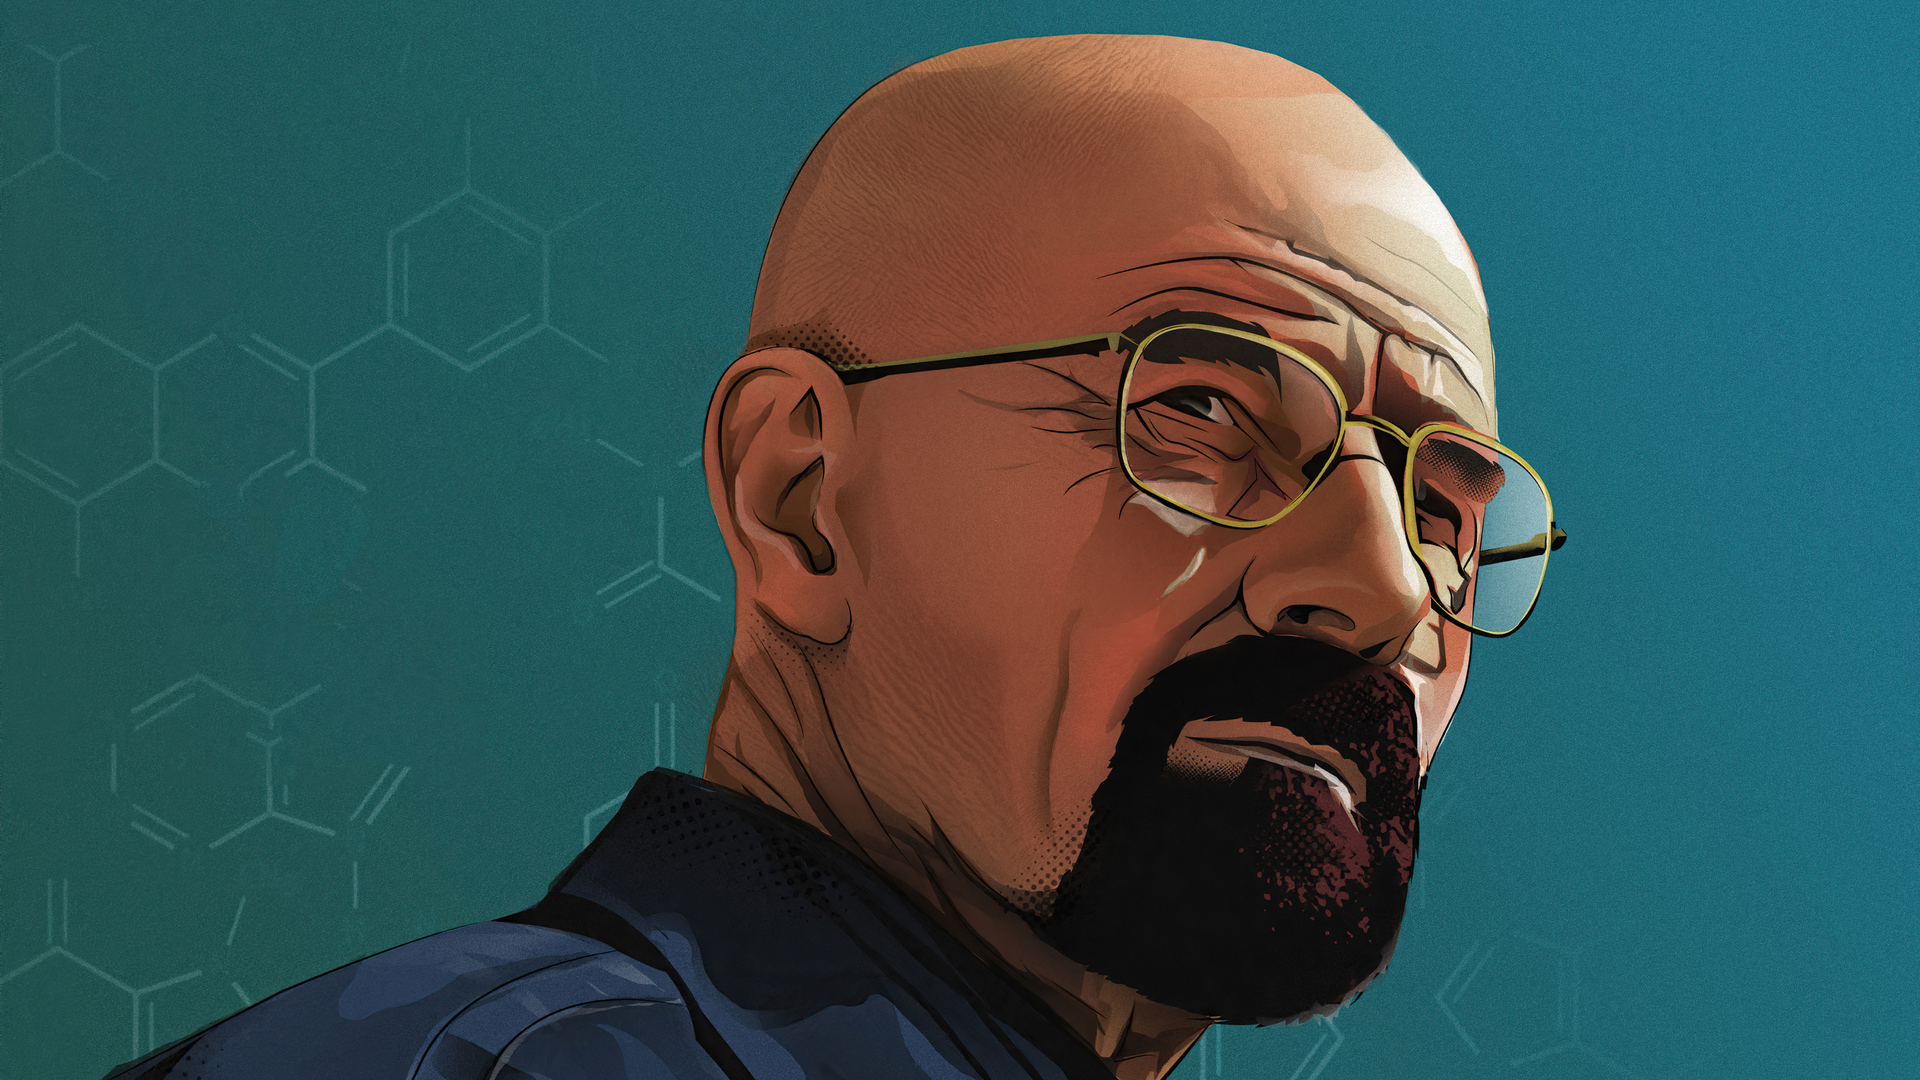 1920x1080 Walter White In Breaking Bad 4k Artwork Laptop Full HD 1080P HD  4k Wallpapers, Images, Backgrounds, Photos and Pictures